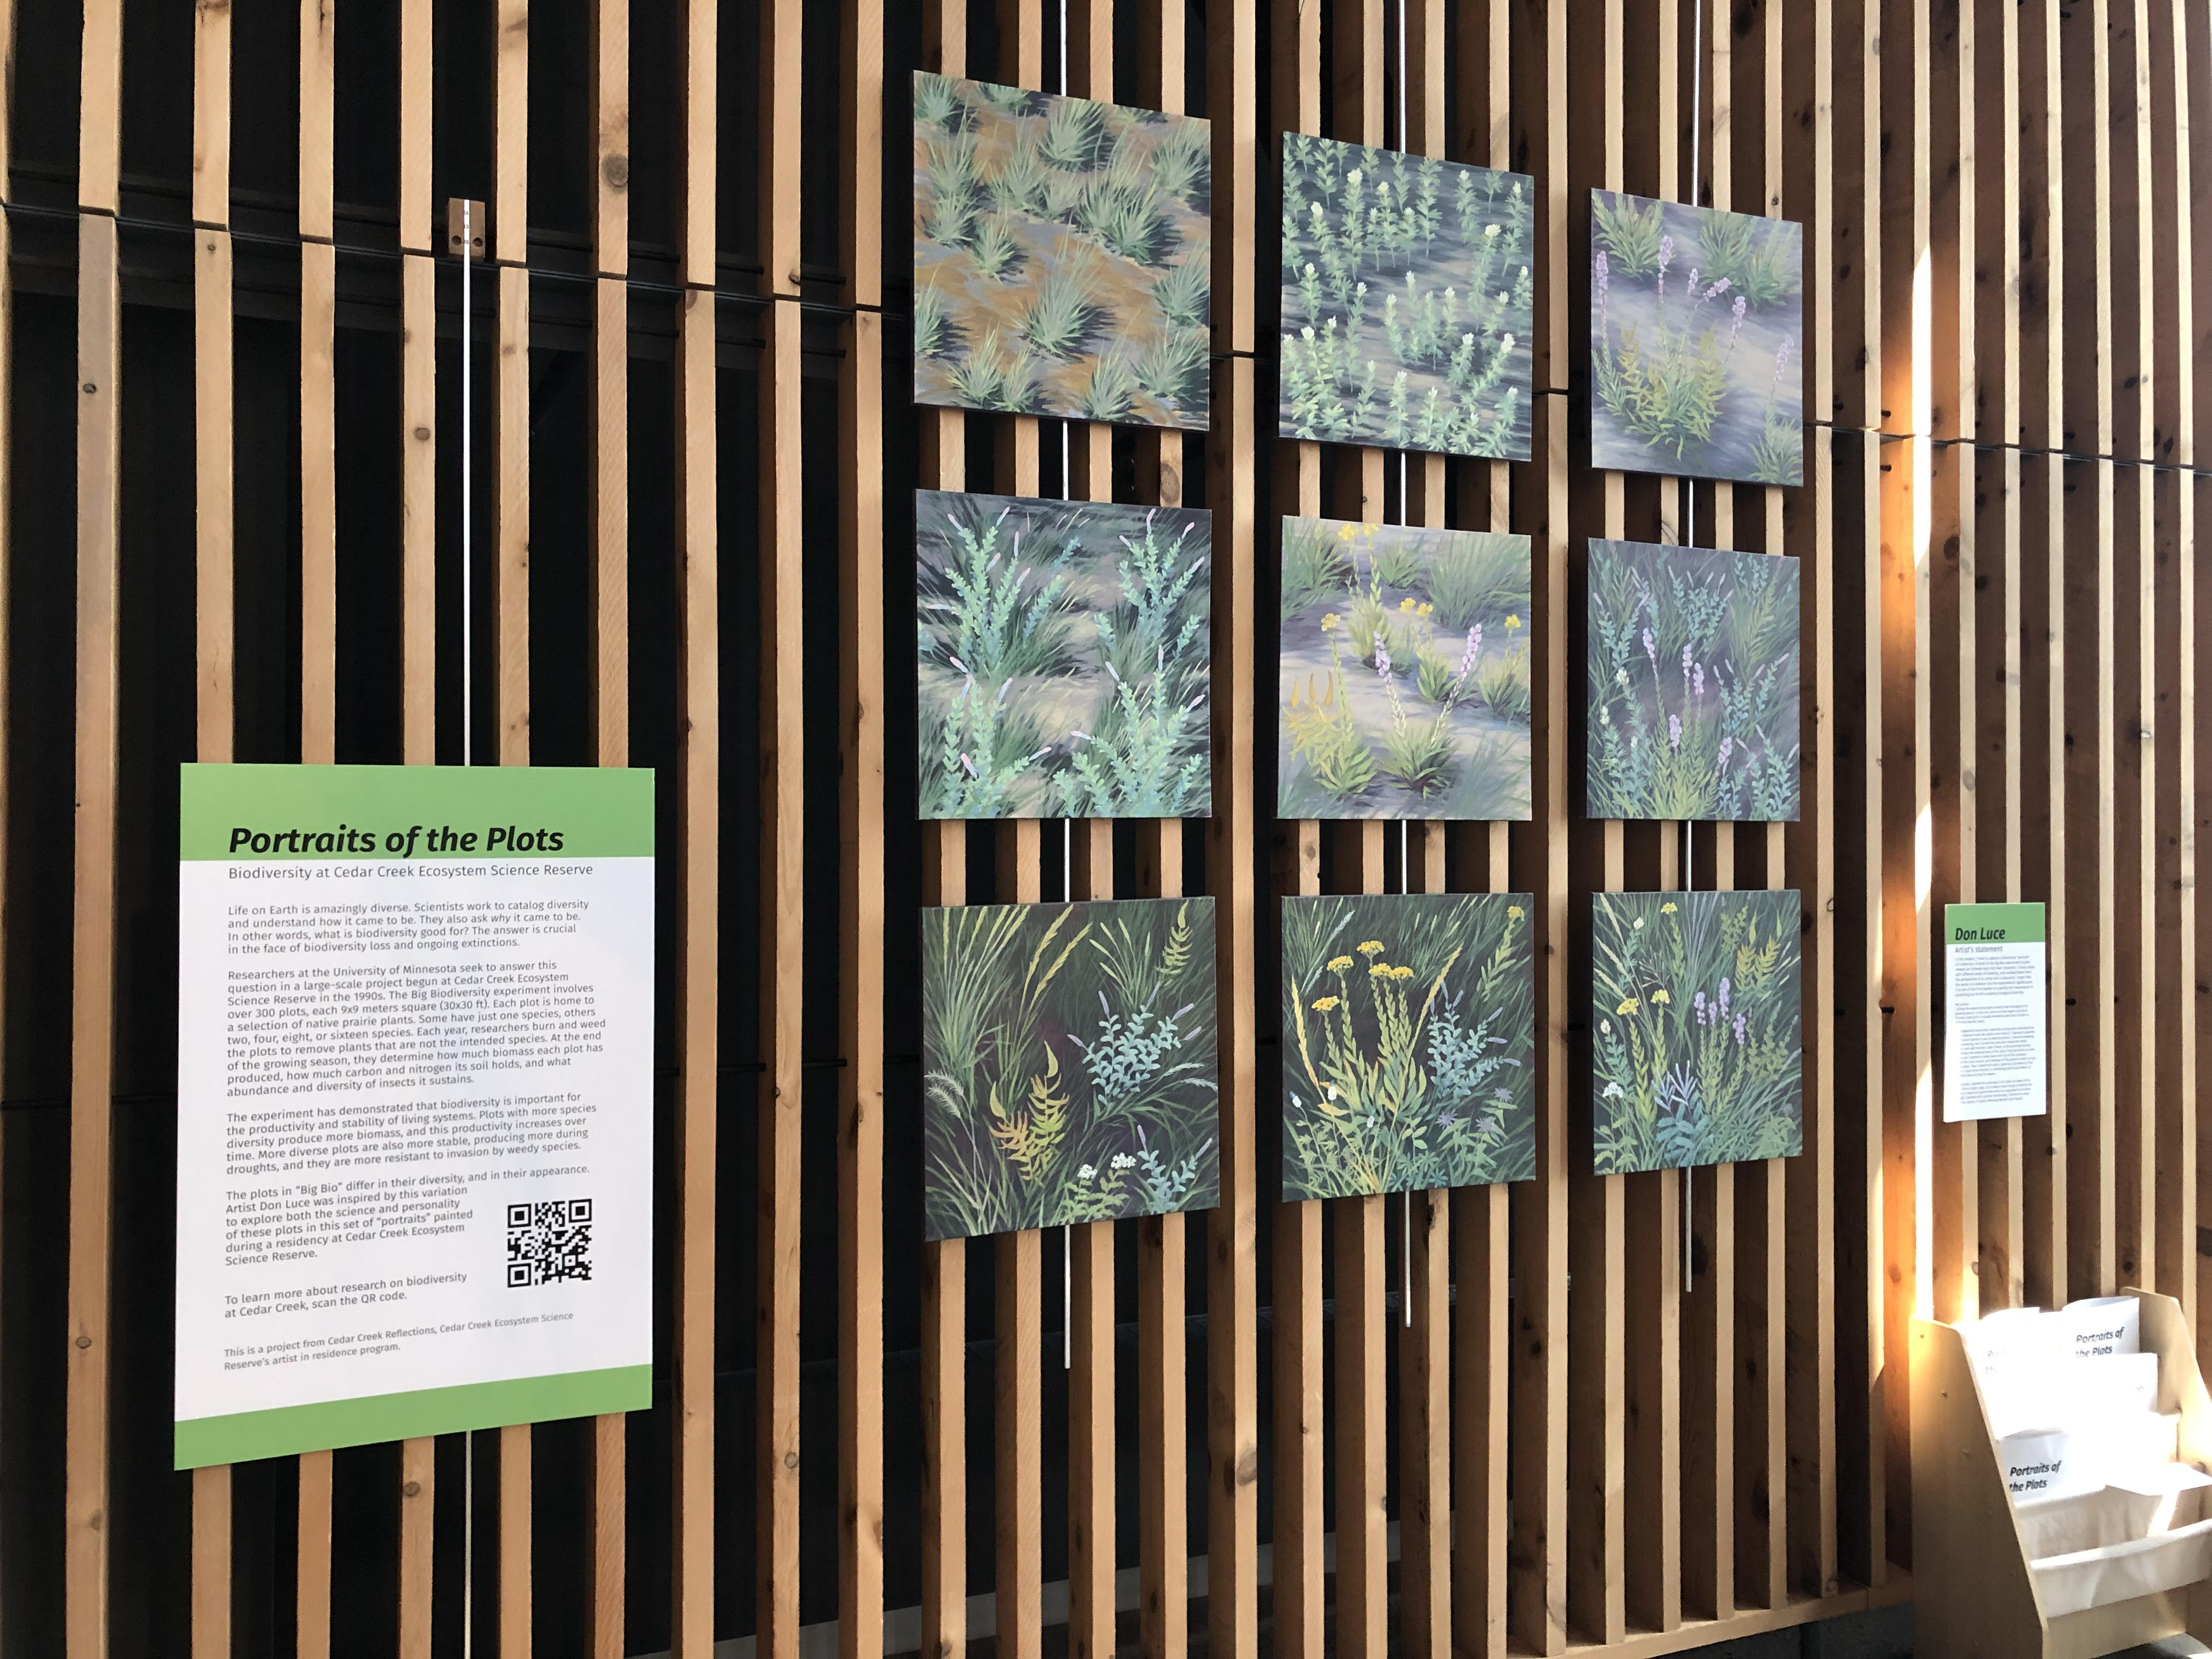 photo of museum exhibit featuring 9 square paintings of prairie plants